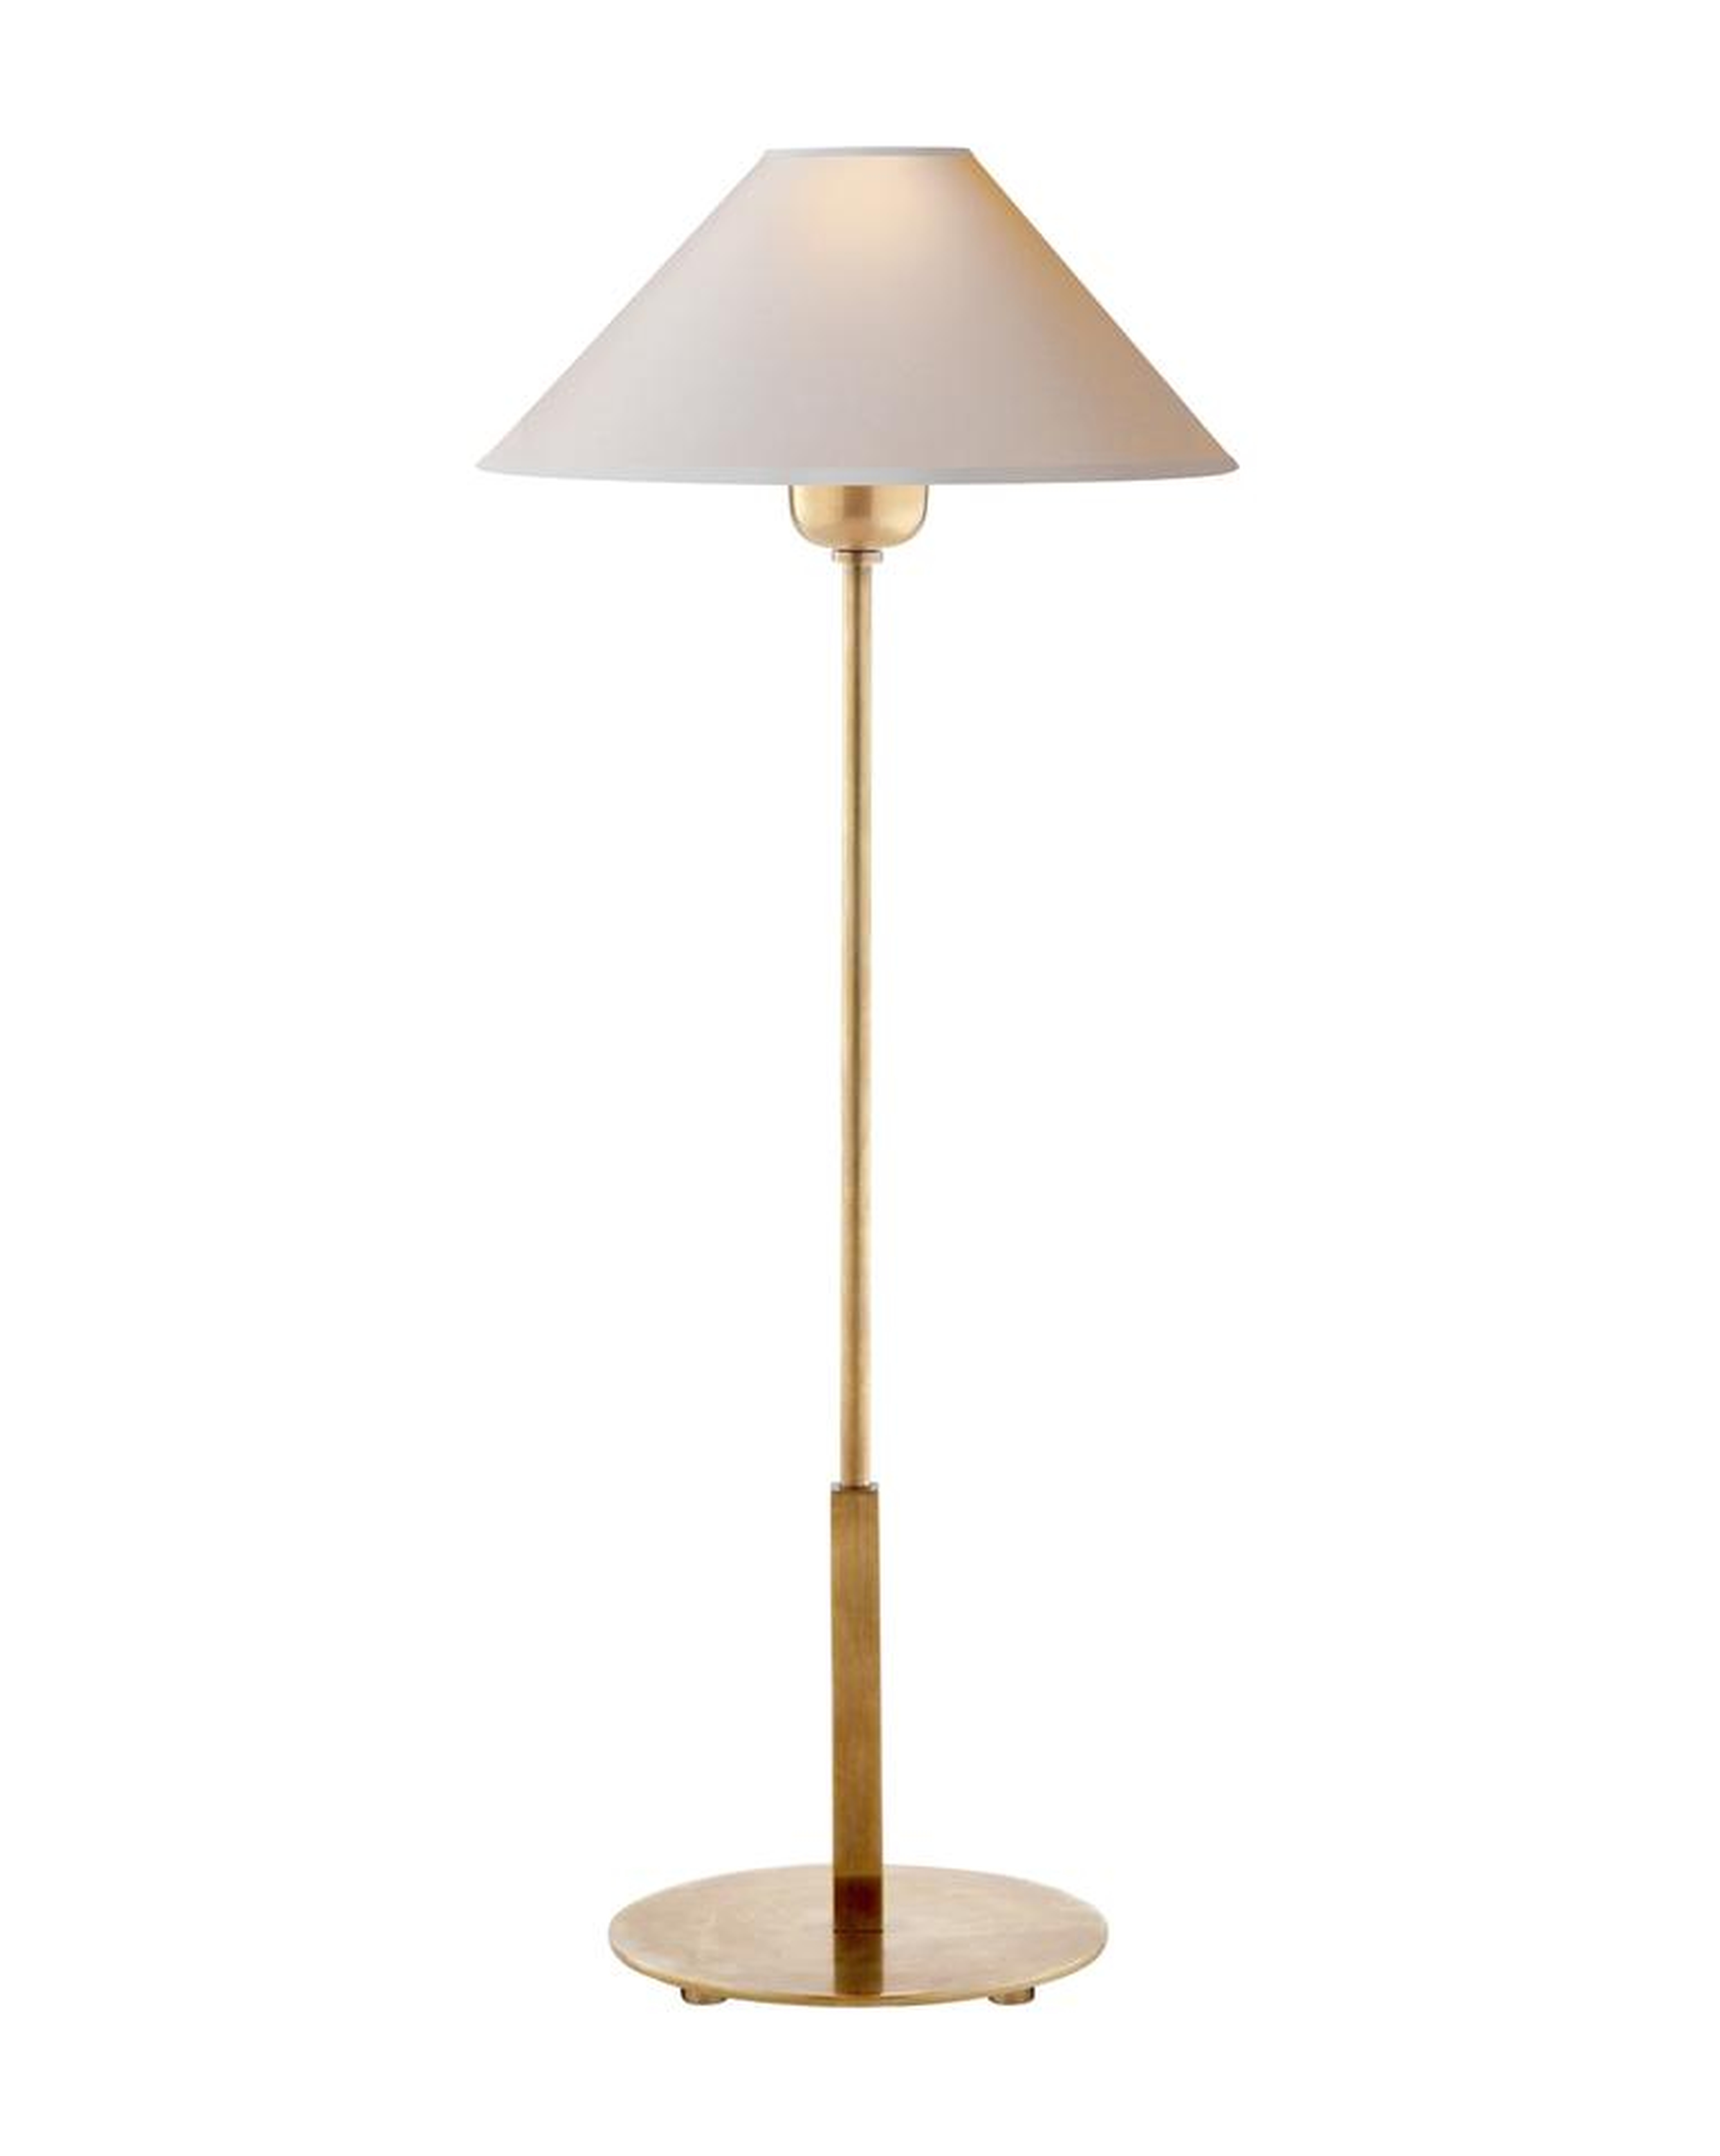 HACKNEY TABLE LAMP - HAND-RUBBED ANTIQUE BRASS - McGee & Co.